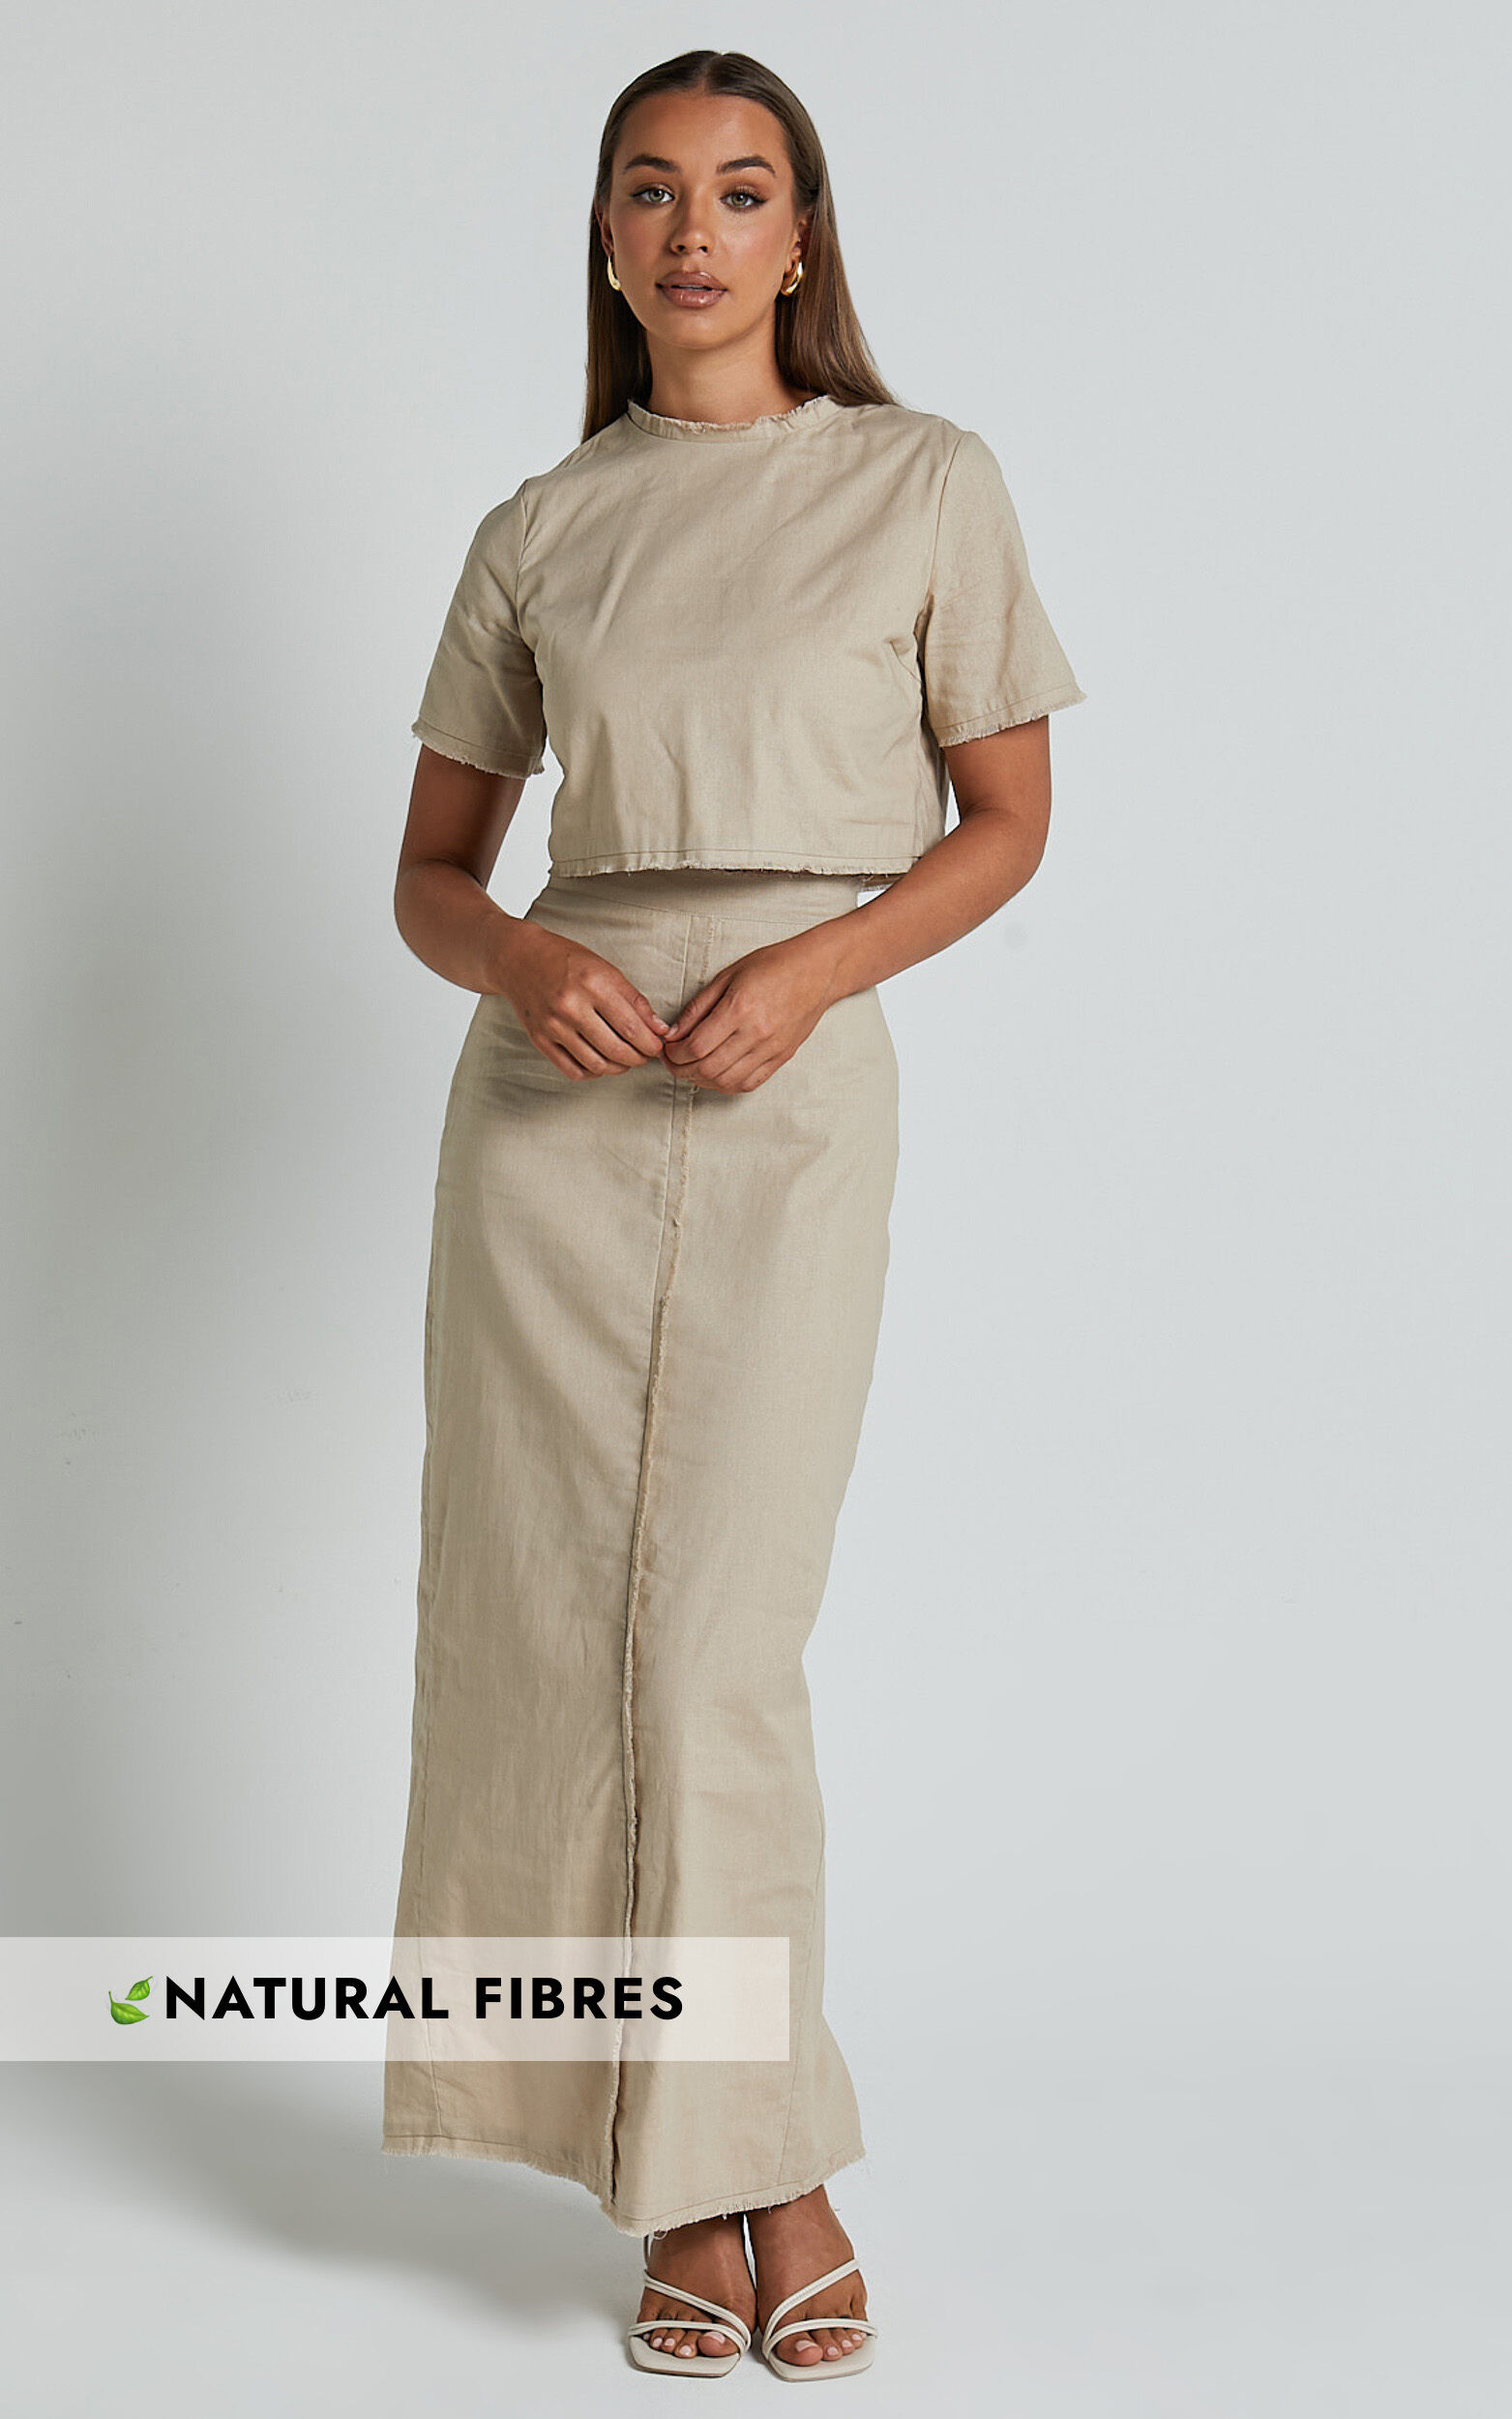 Tisdale Two Piece Set - Linen Look Scoop Neck Short Sleeve Cropped Top and Maxi Skirt in Sand - 04, NEU1